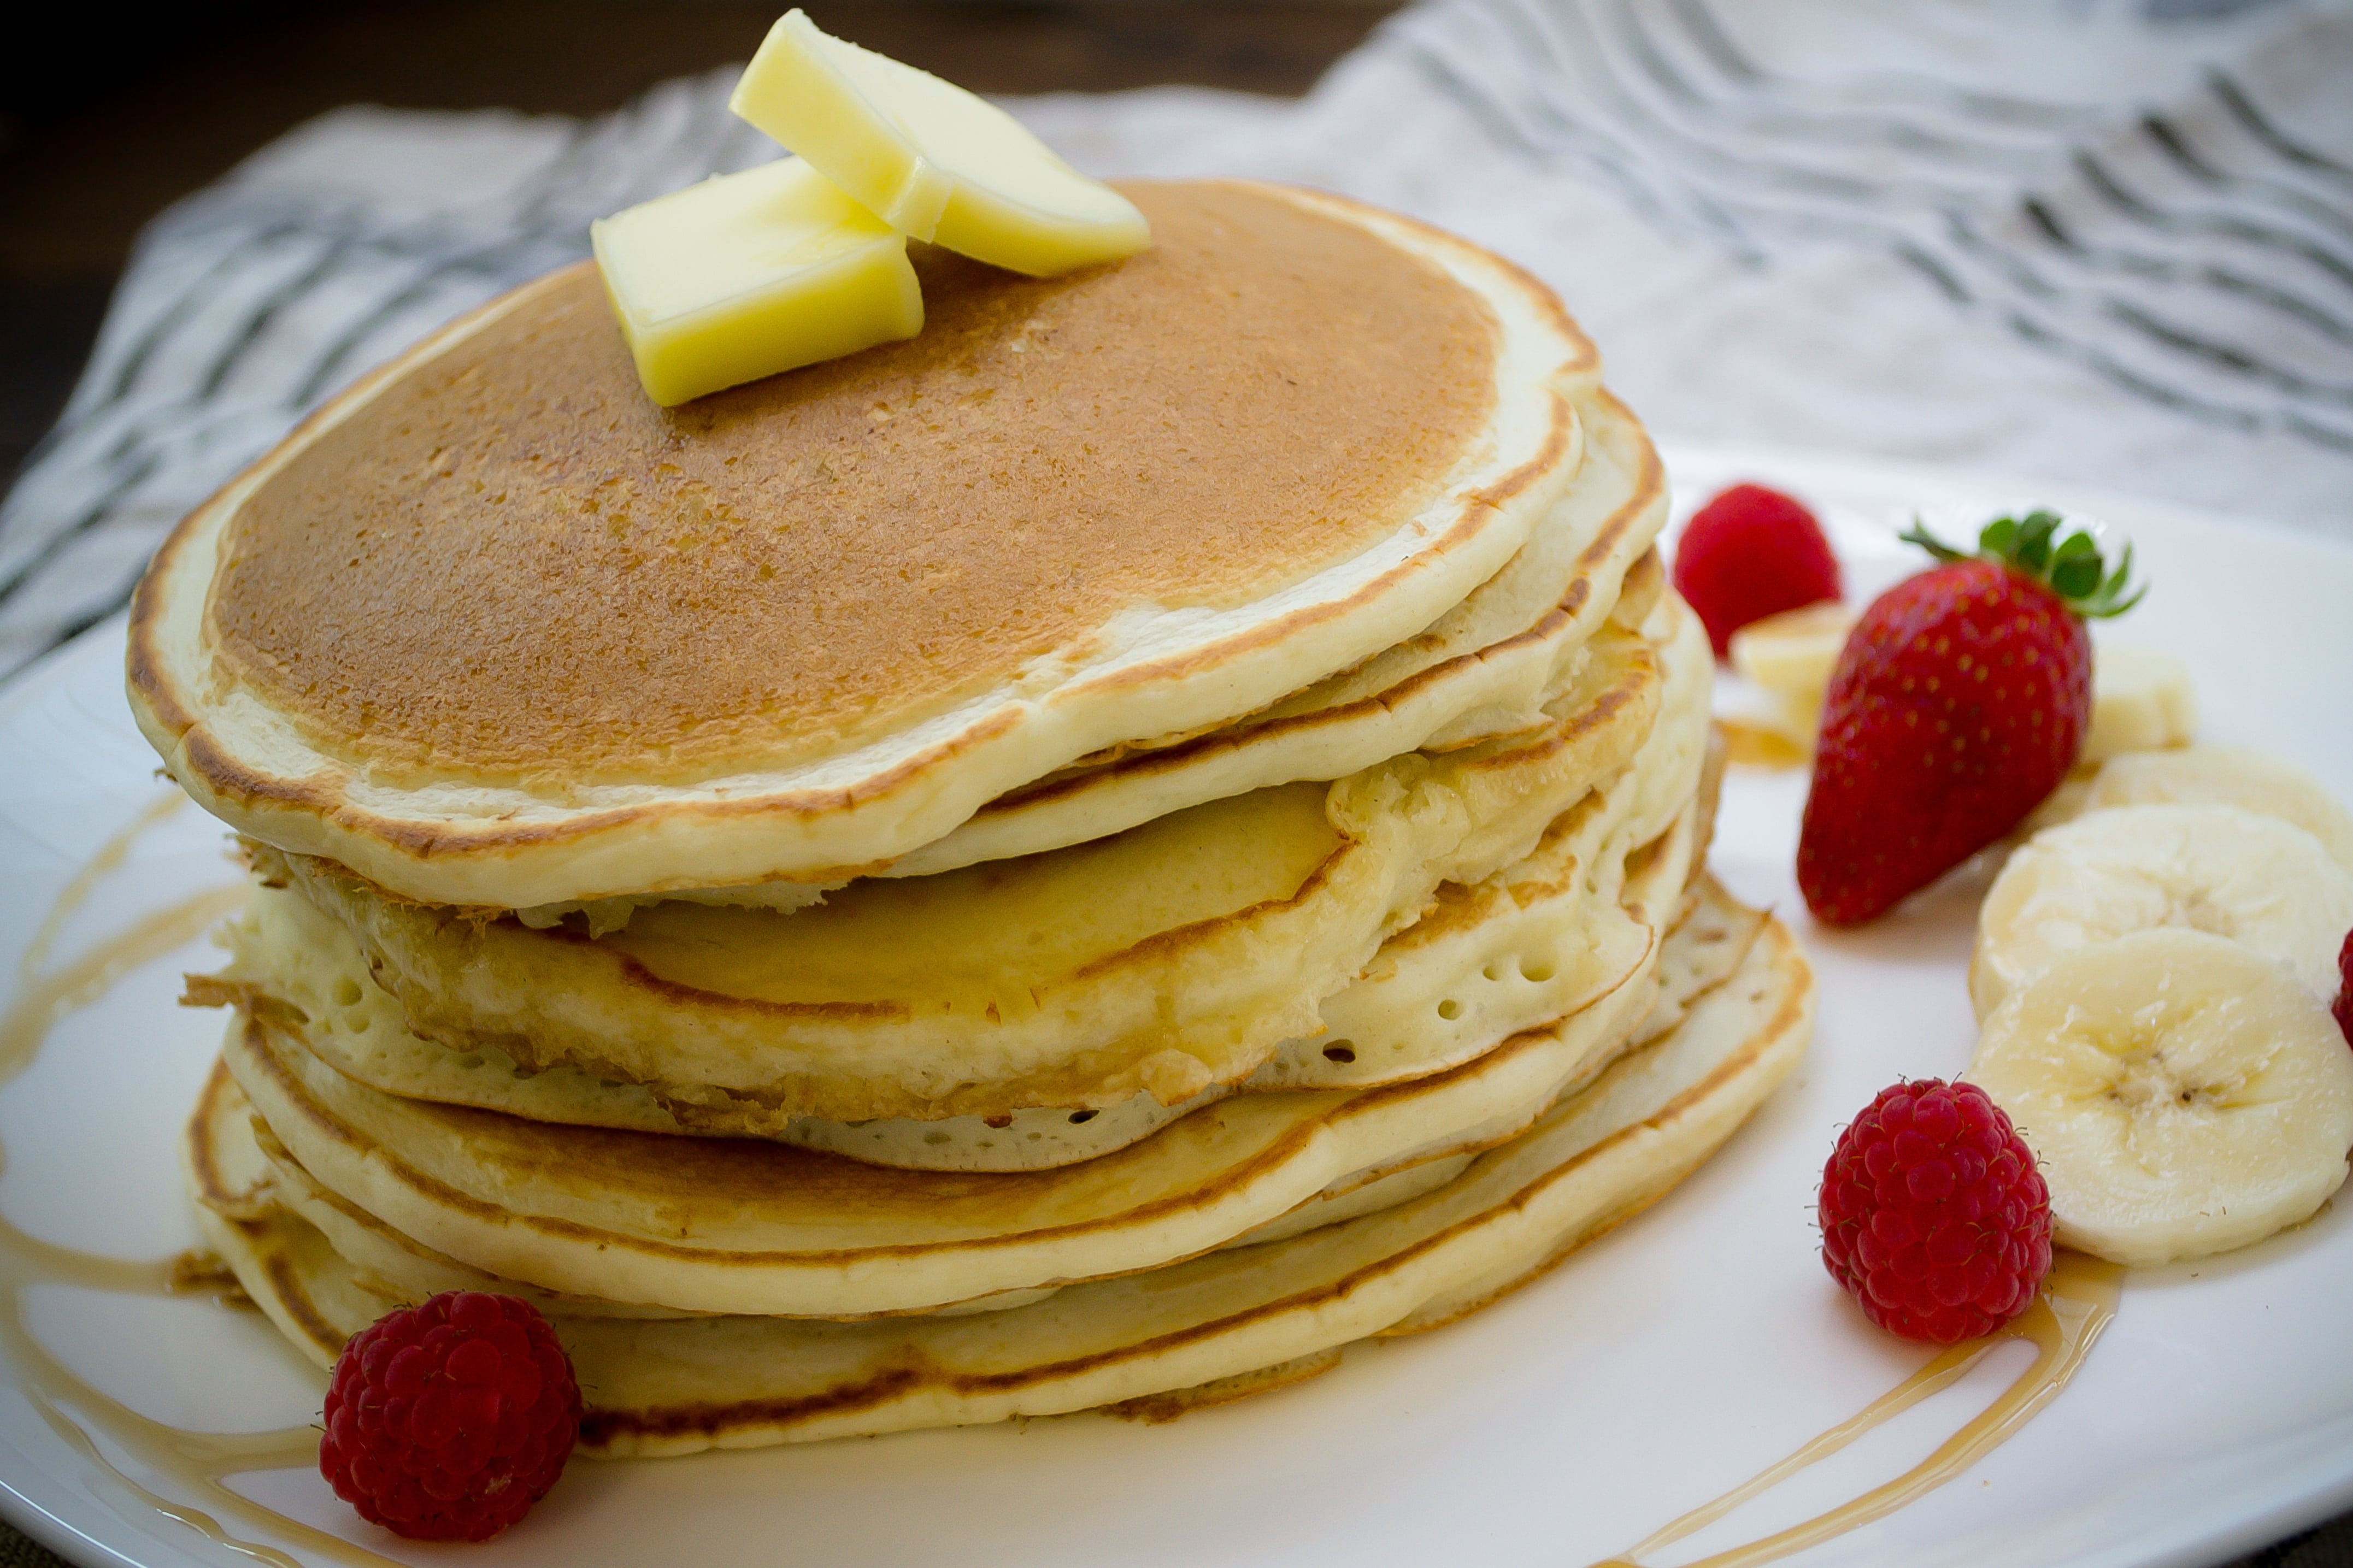 Spongy Hot Cakes with Yoghurt